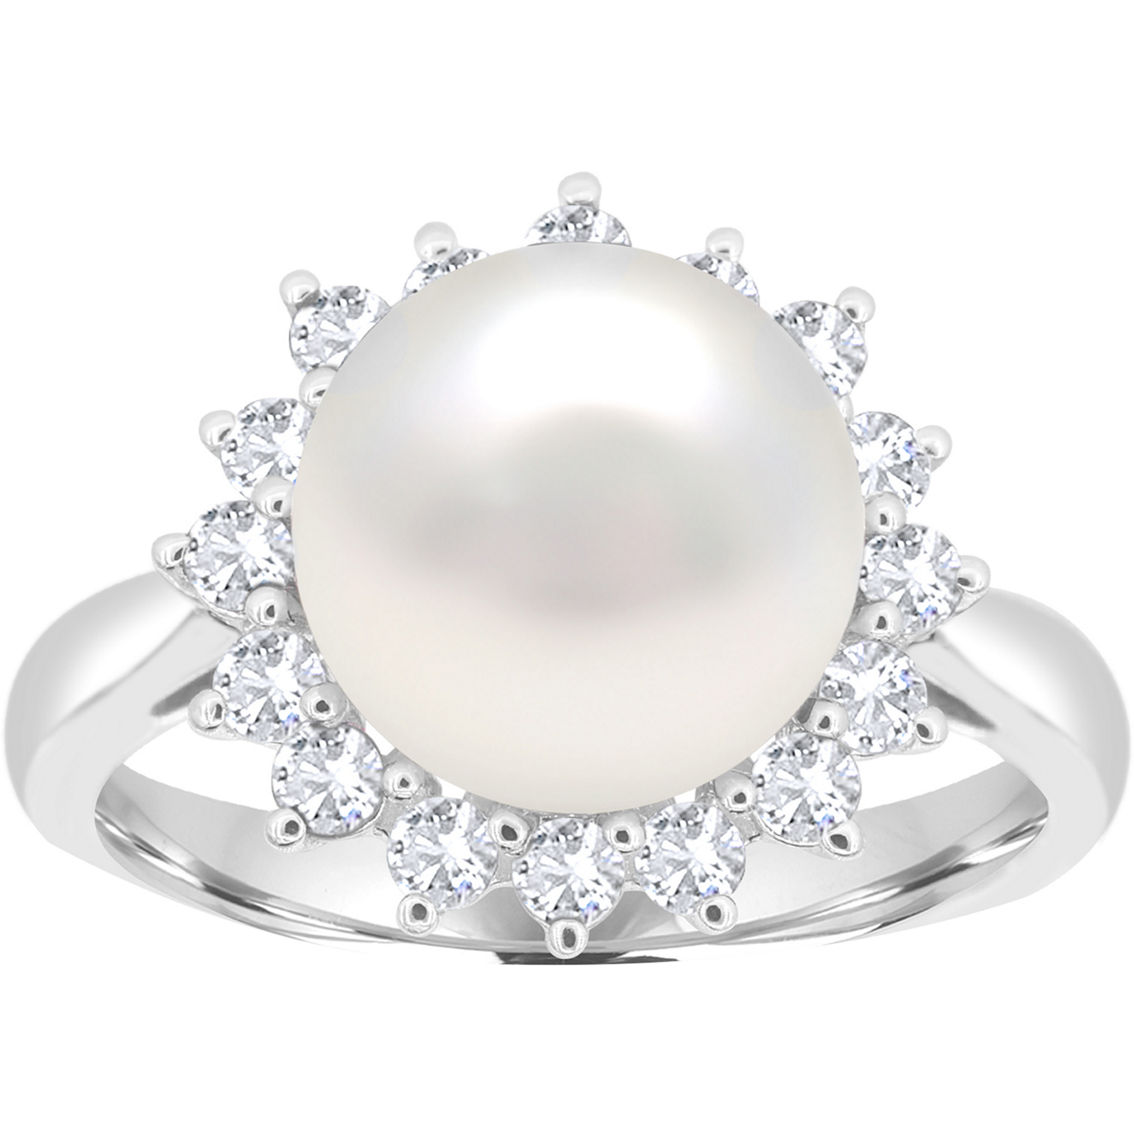 Sterling Silver Freshwater Cultured Pearl and Lab Created White Sapphire 3 pc. Set - Image 4 of 7